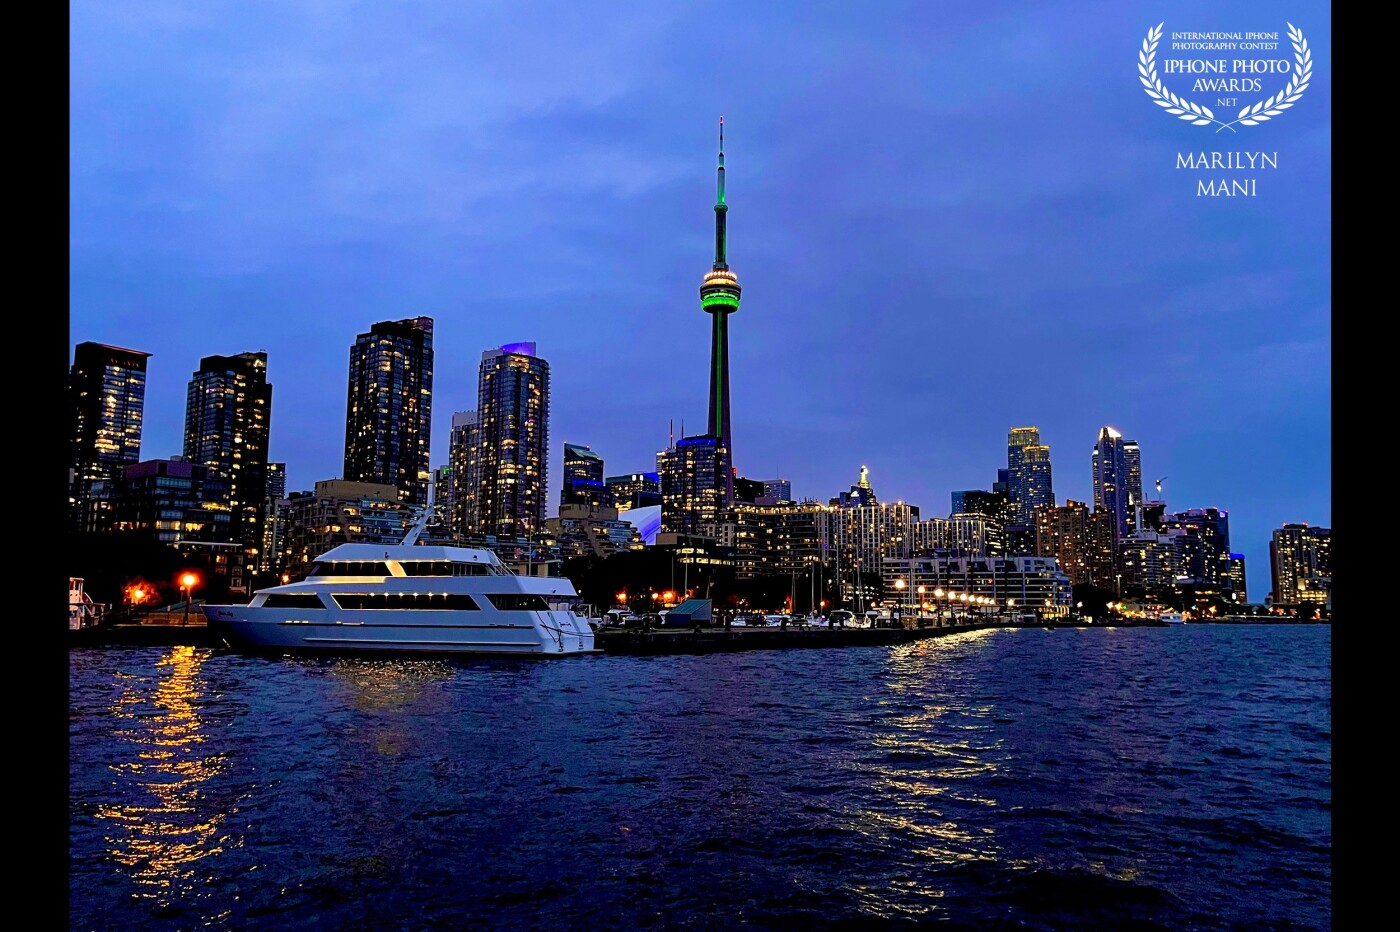 The majestic and dreamy sparkling Toronto skyline. My favourite spot along the waterfront to catch this gorgeous view of the night lights along the beautiful Lake Ontario!